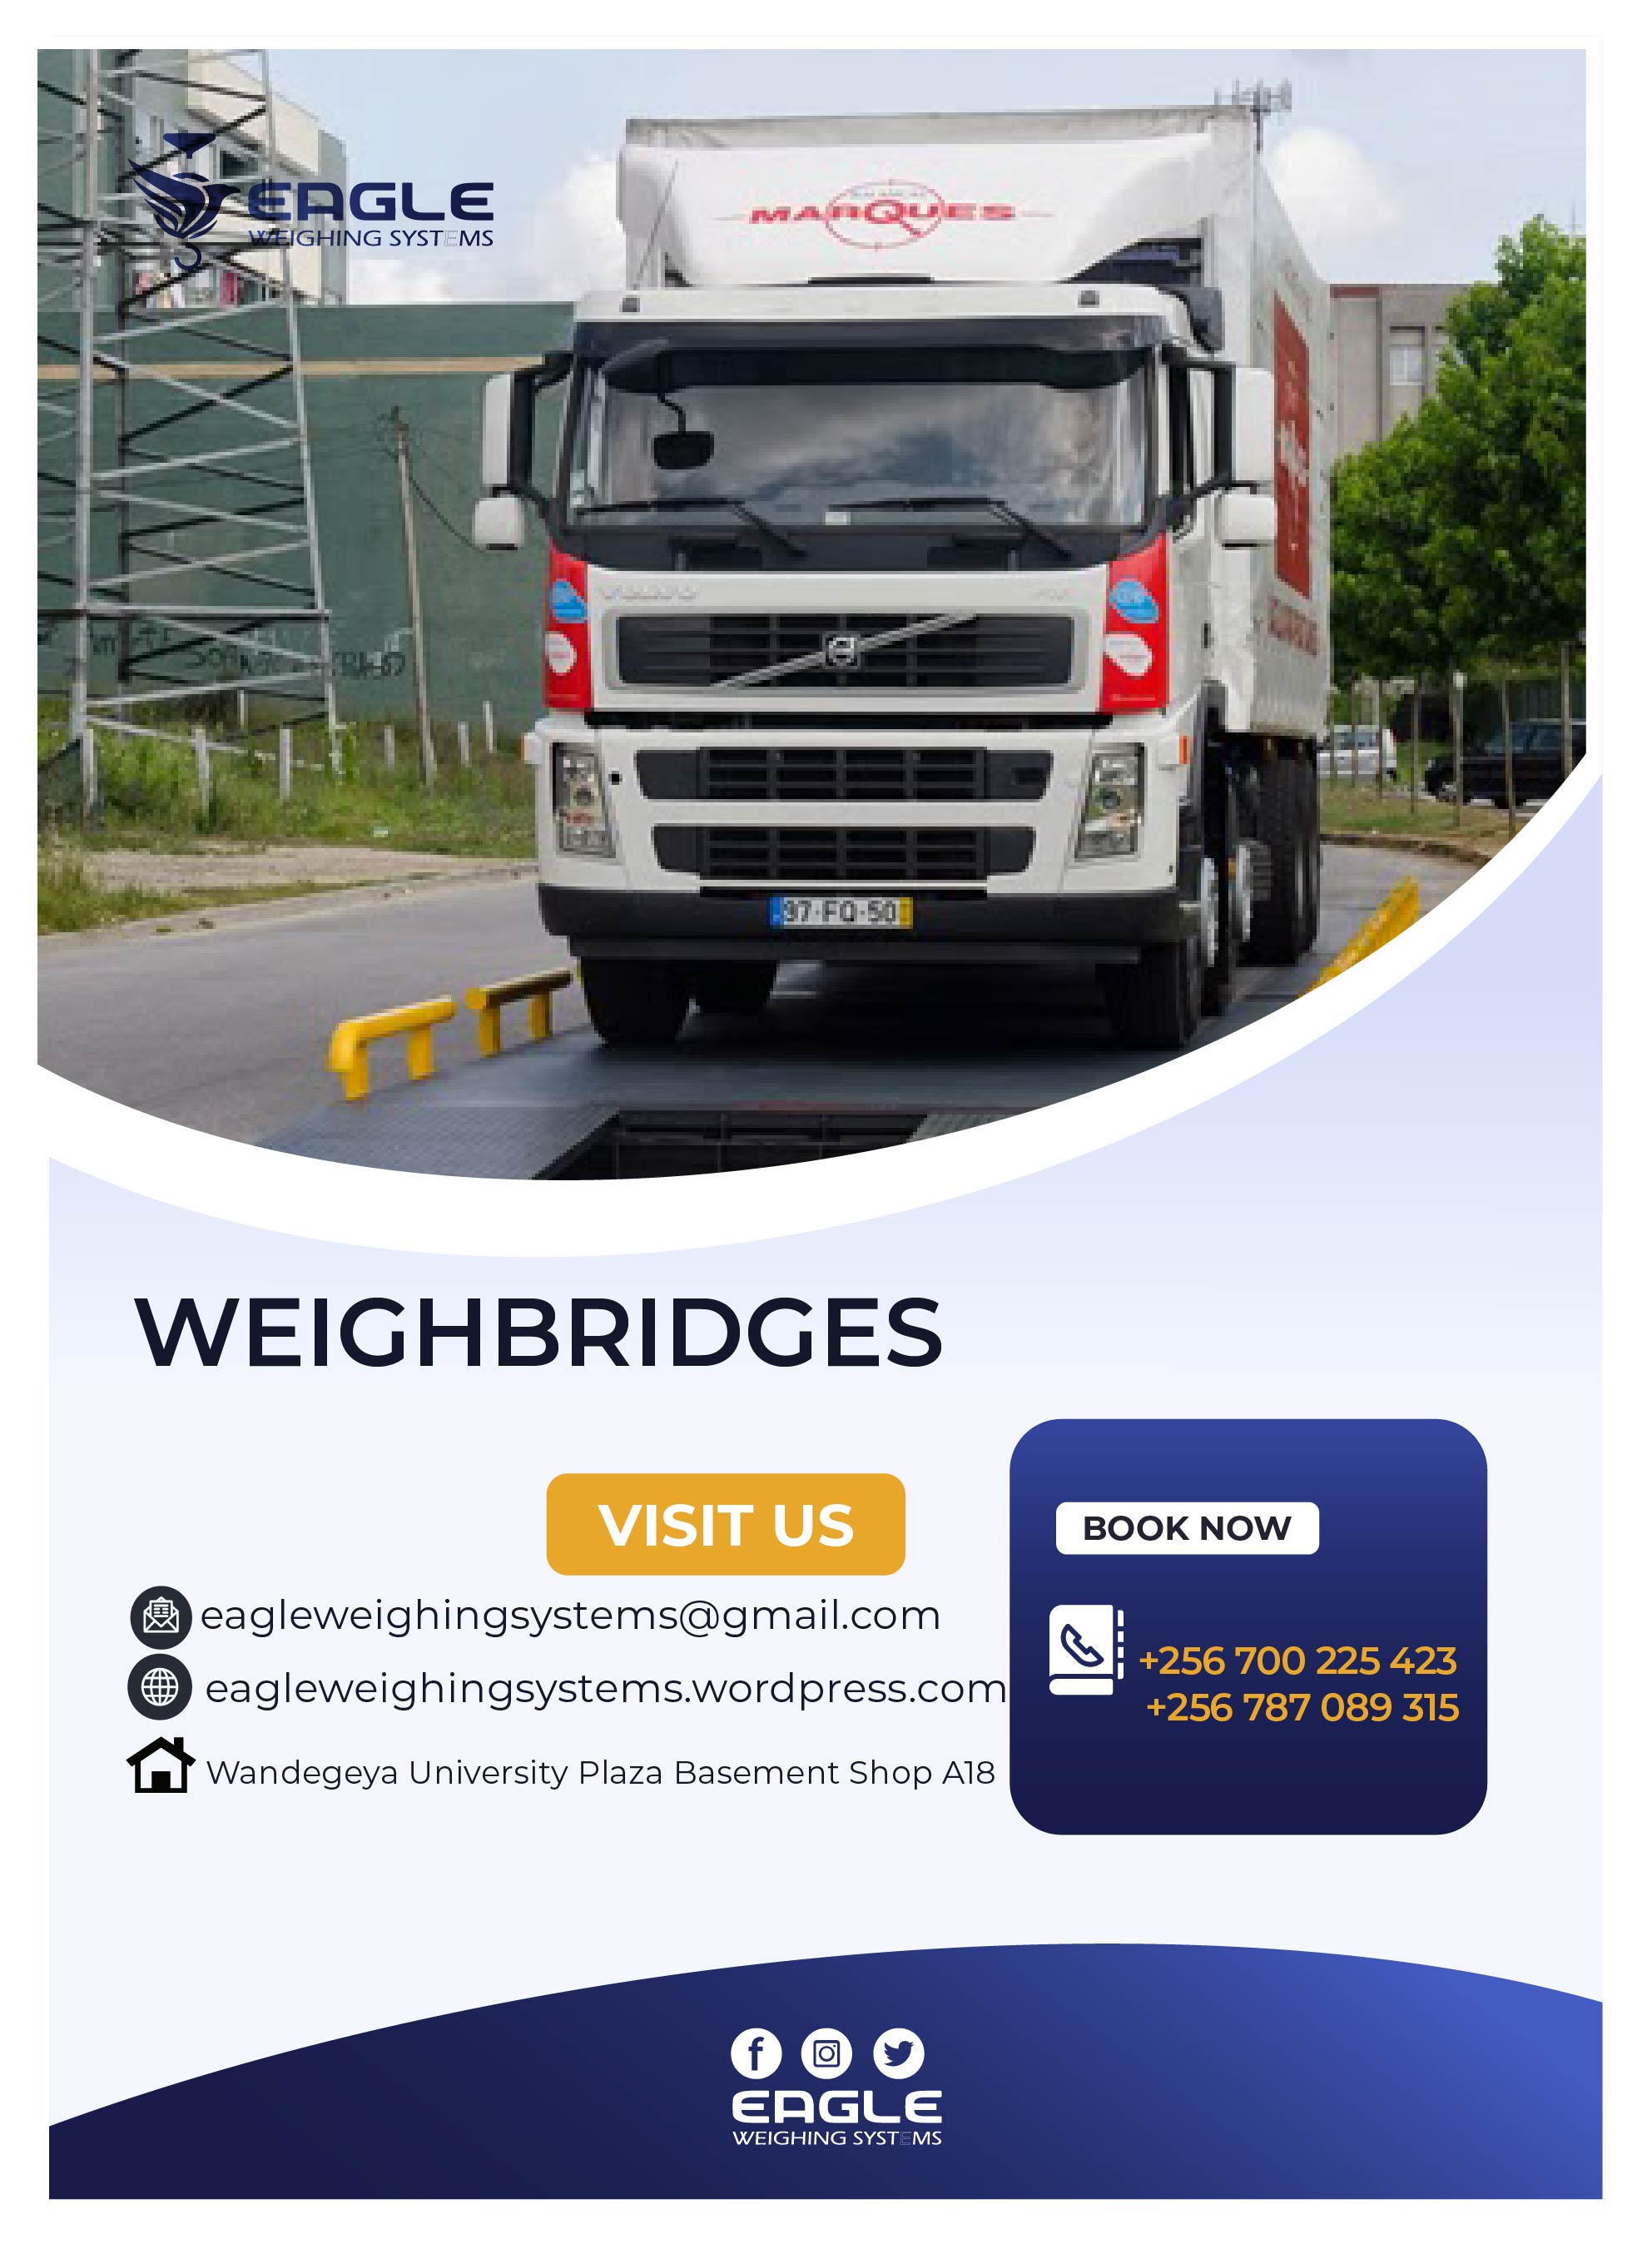 +256 (0) 700225423 Weighbridge with Automatic barriers for sale in Uganda, Kampala Central Division, Central, Uganda